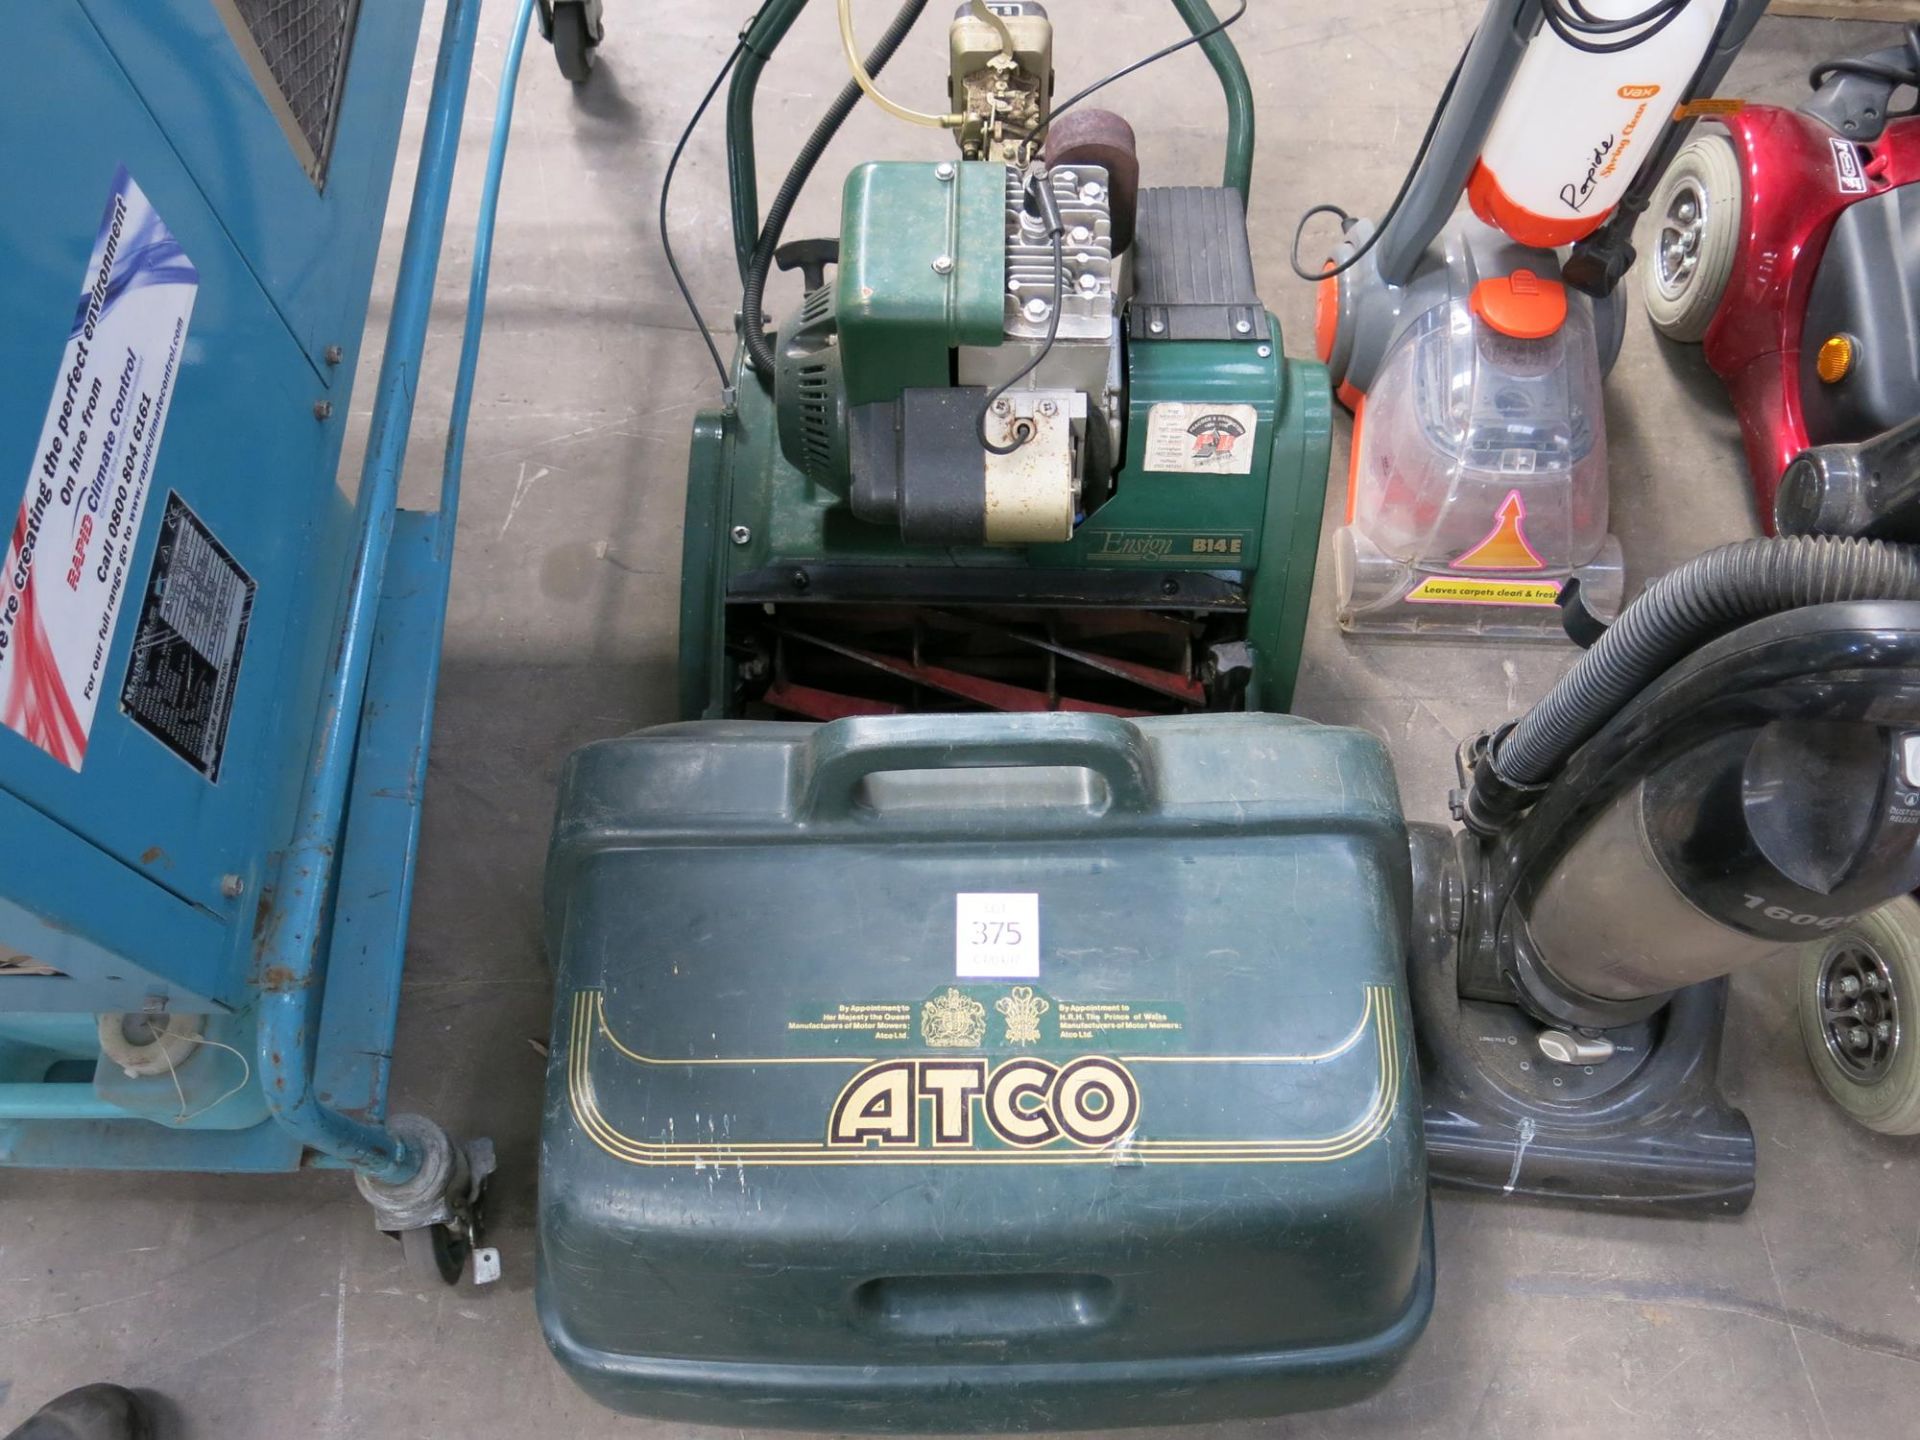 An ATCO Ensign B14E petrol cylinder mower. - Image 2 of 3